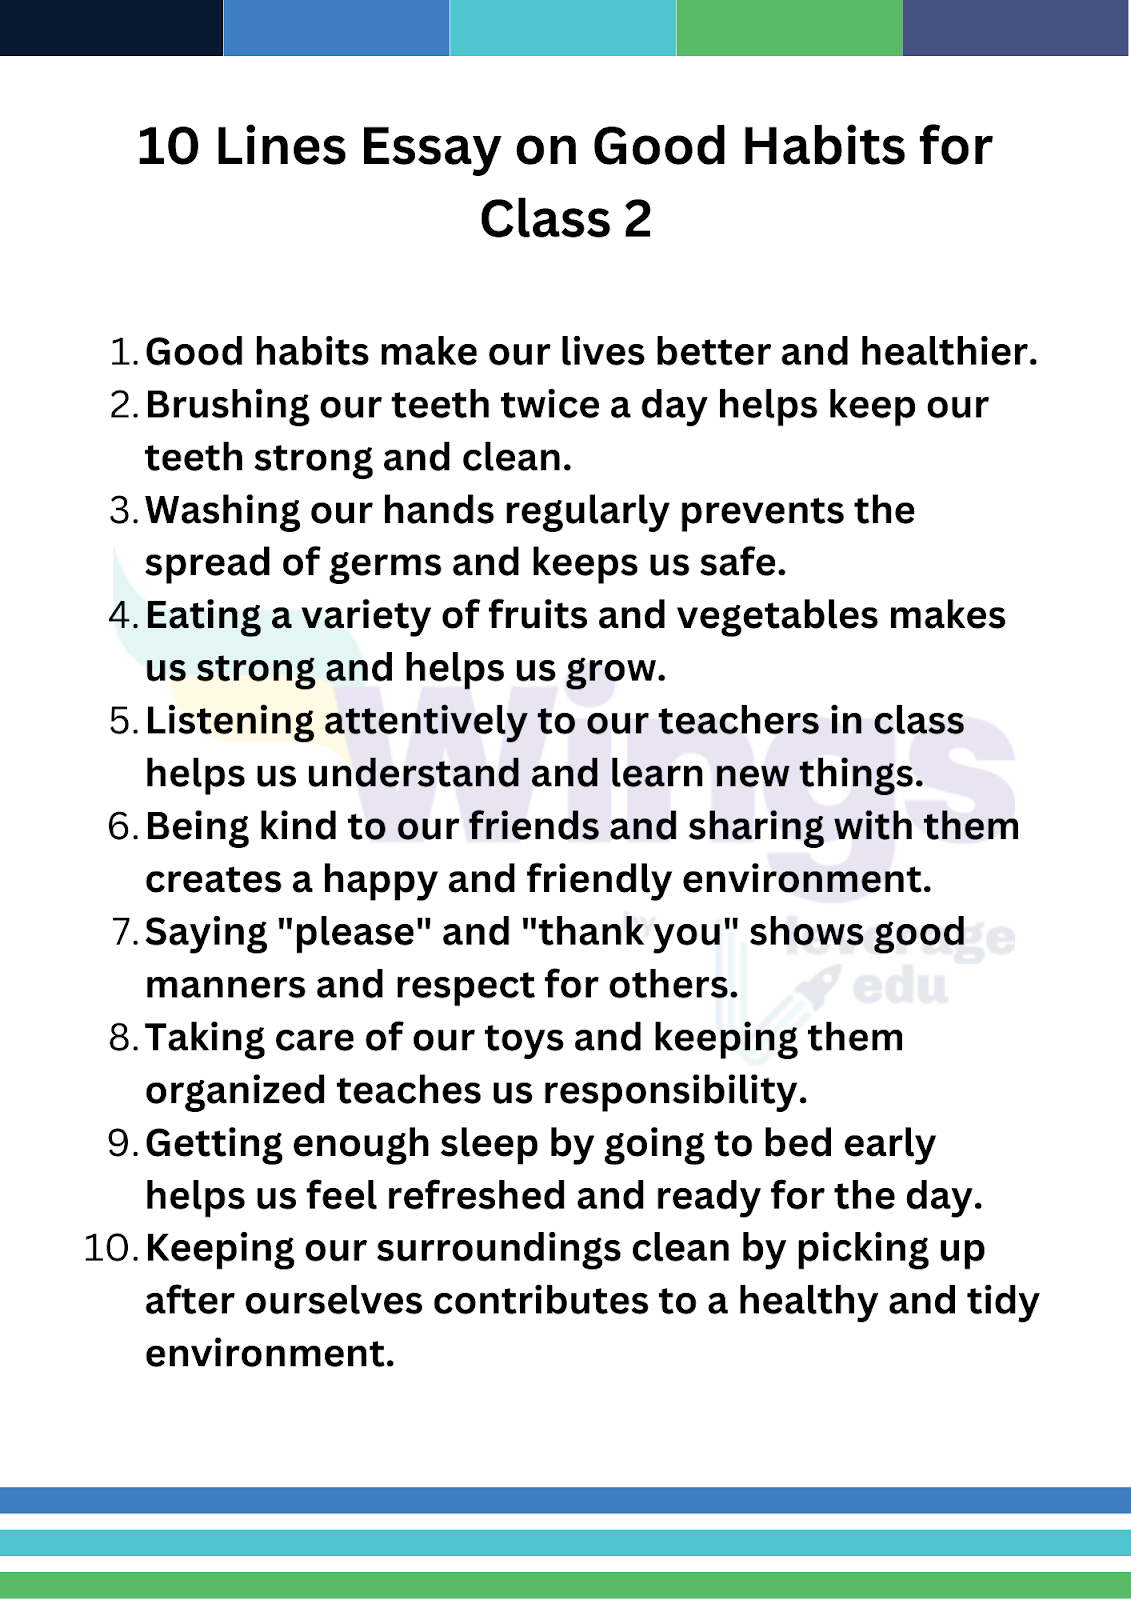 10 Lines Essay on Good Habits for Class 2